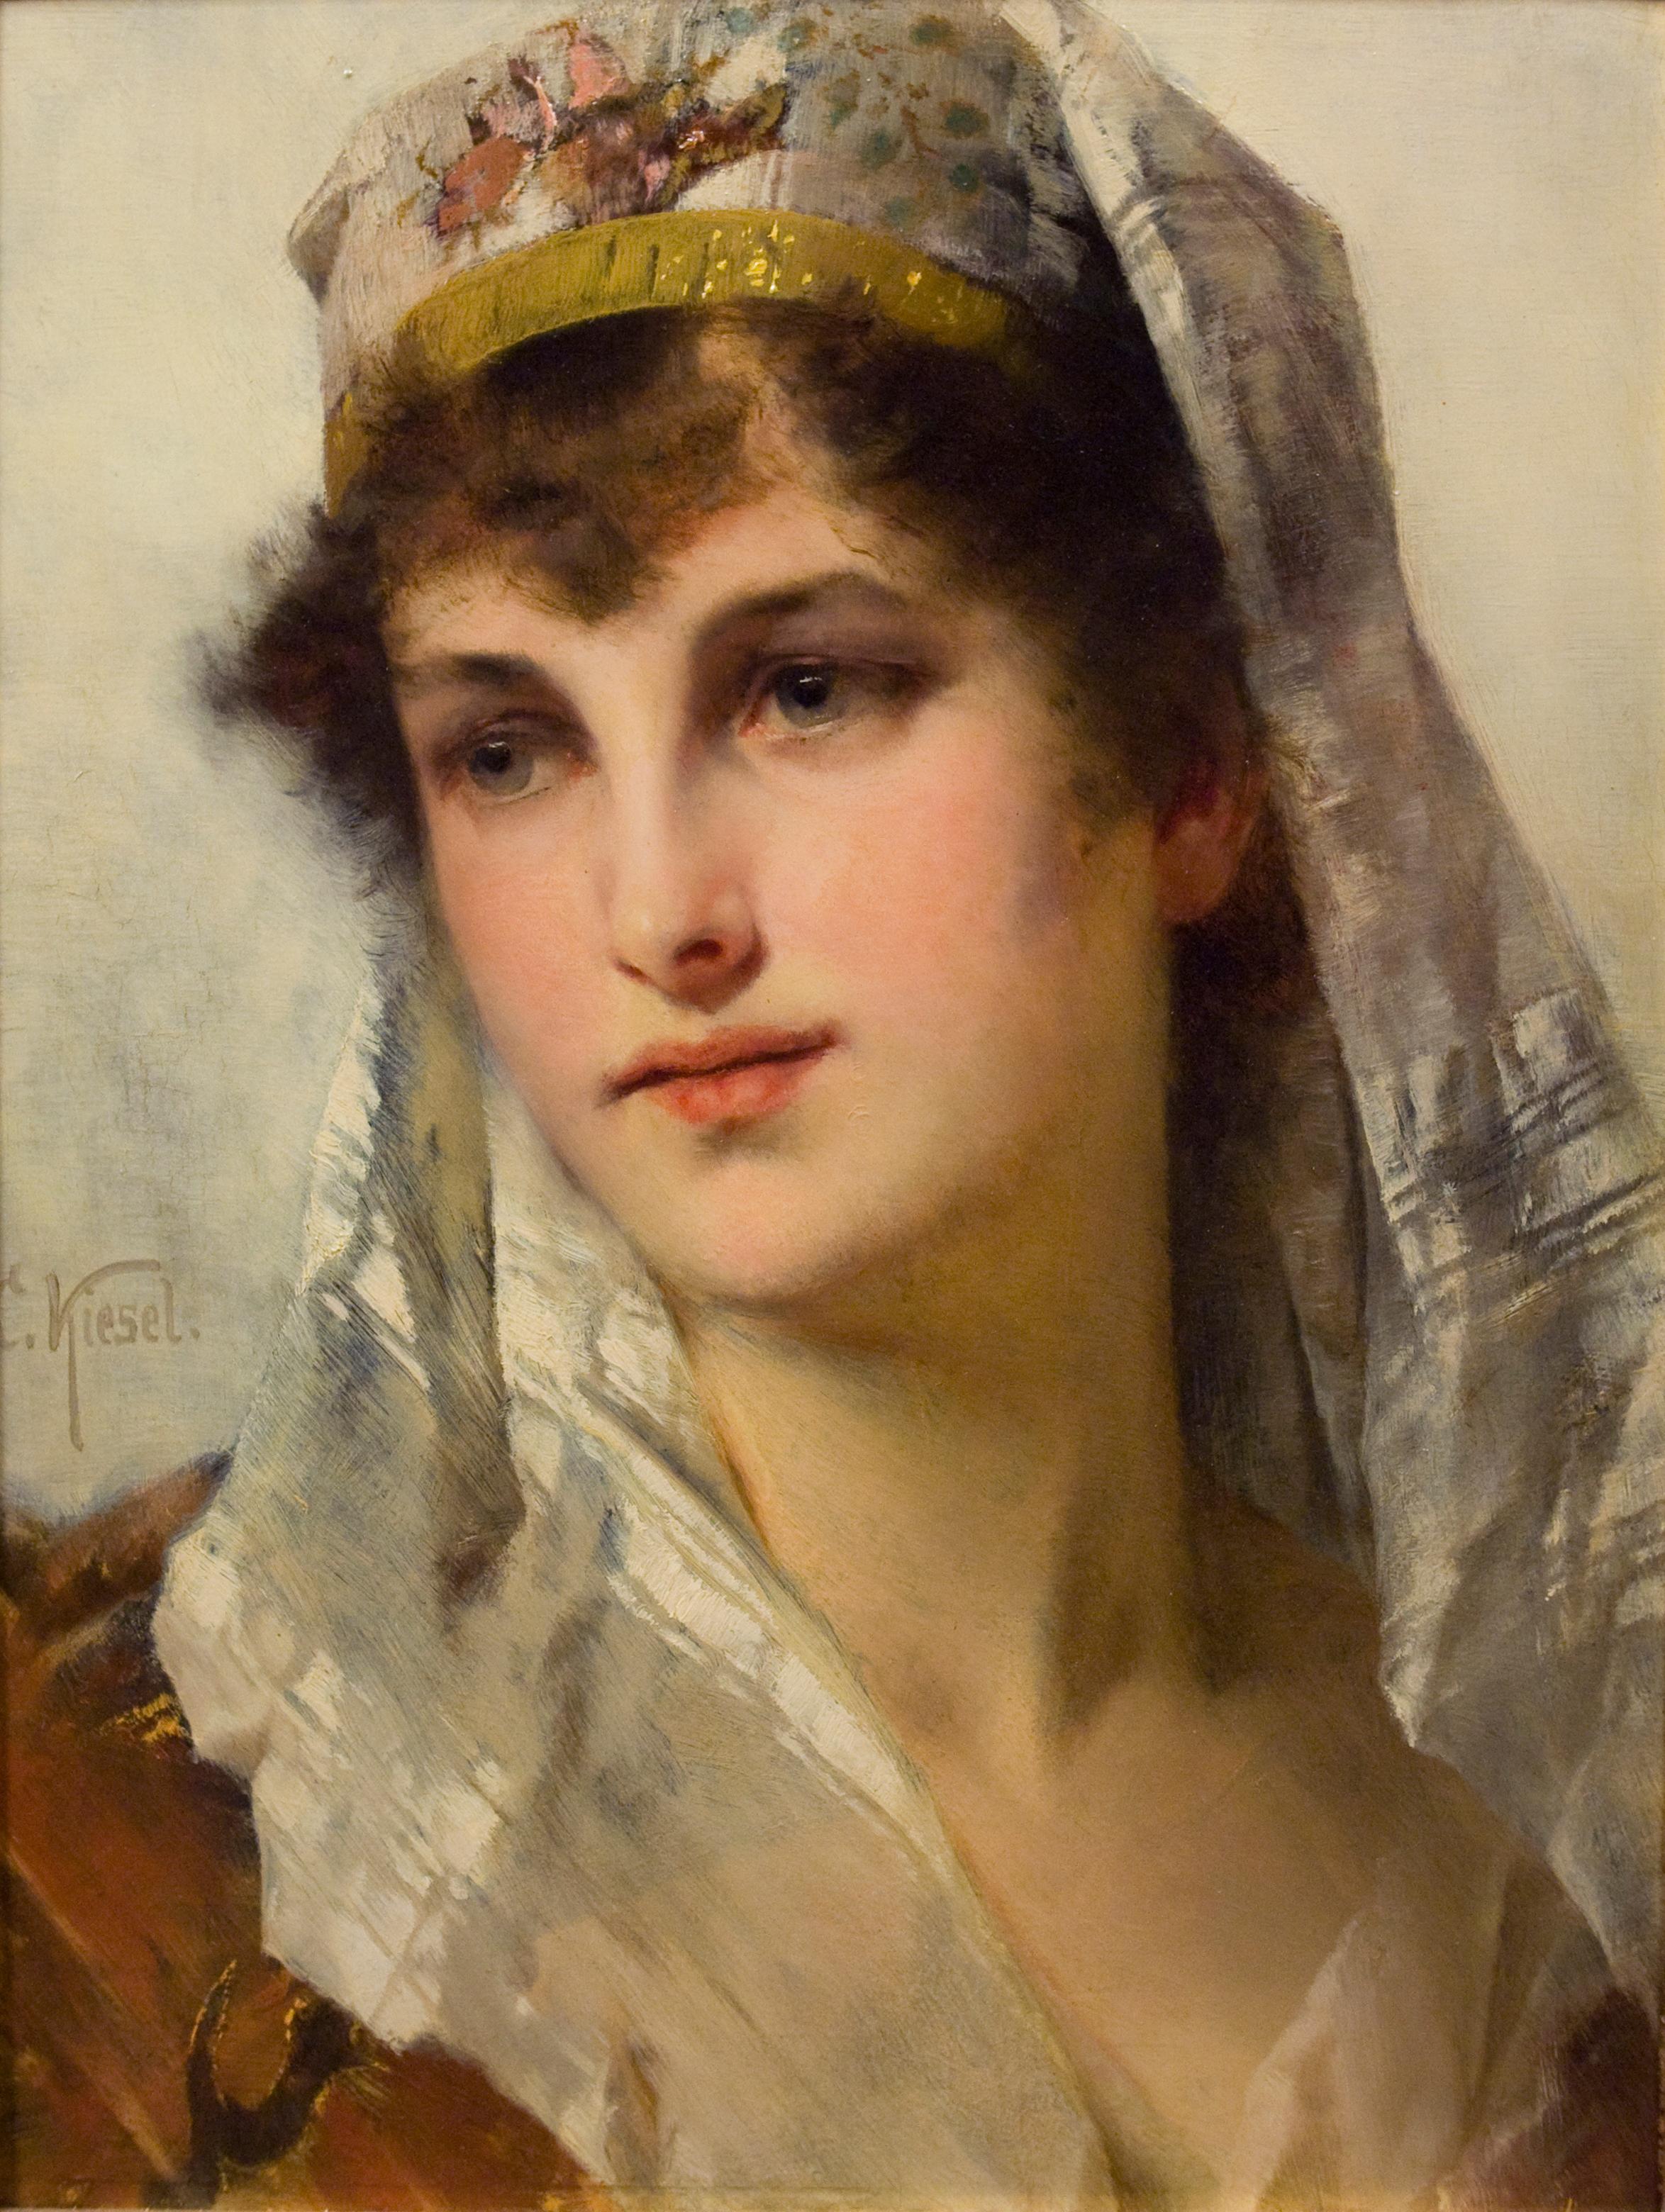 Conrad Kiesel Portrait Painting - 19th century portrait of a Young beauty in a Headdress